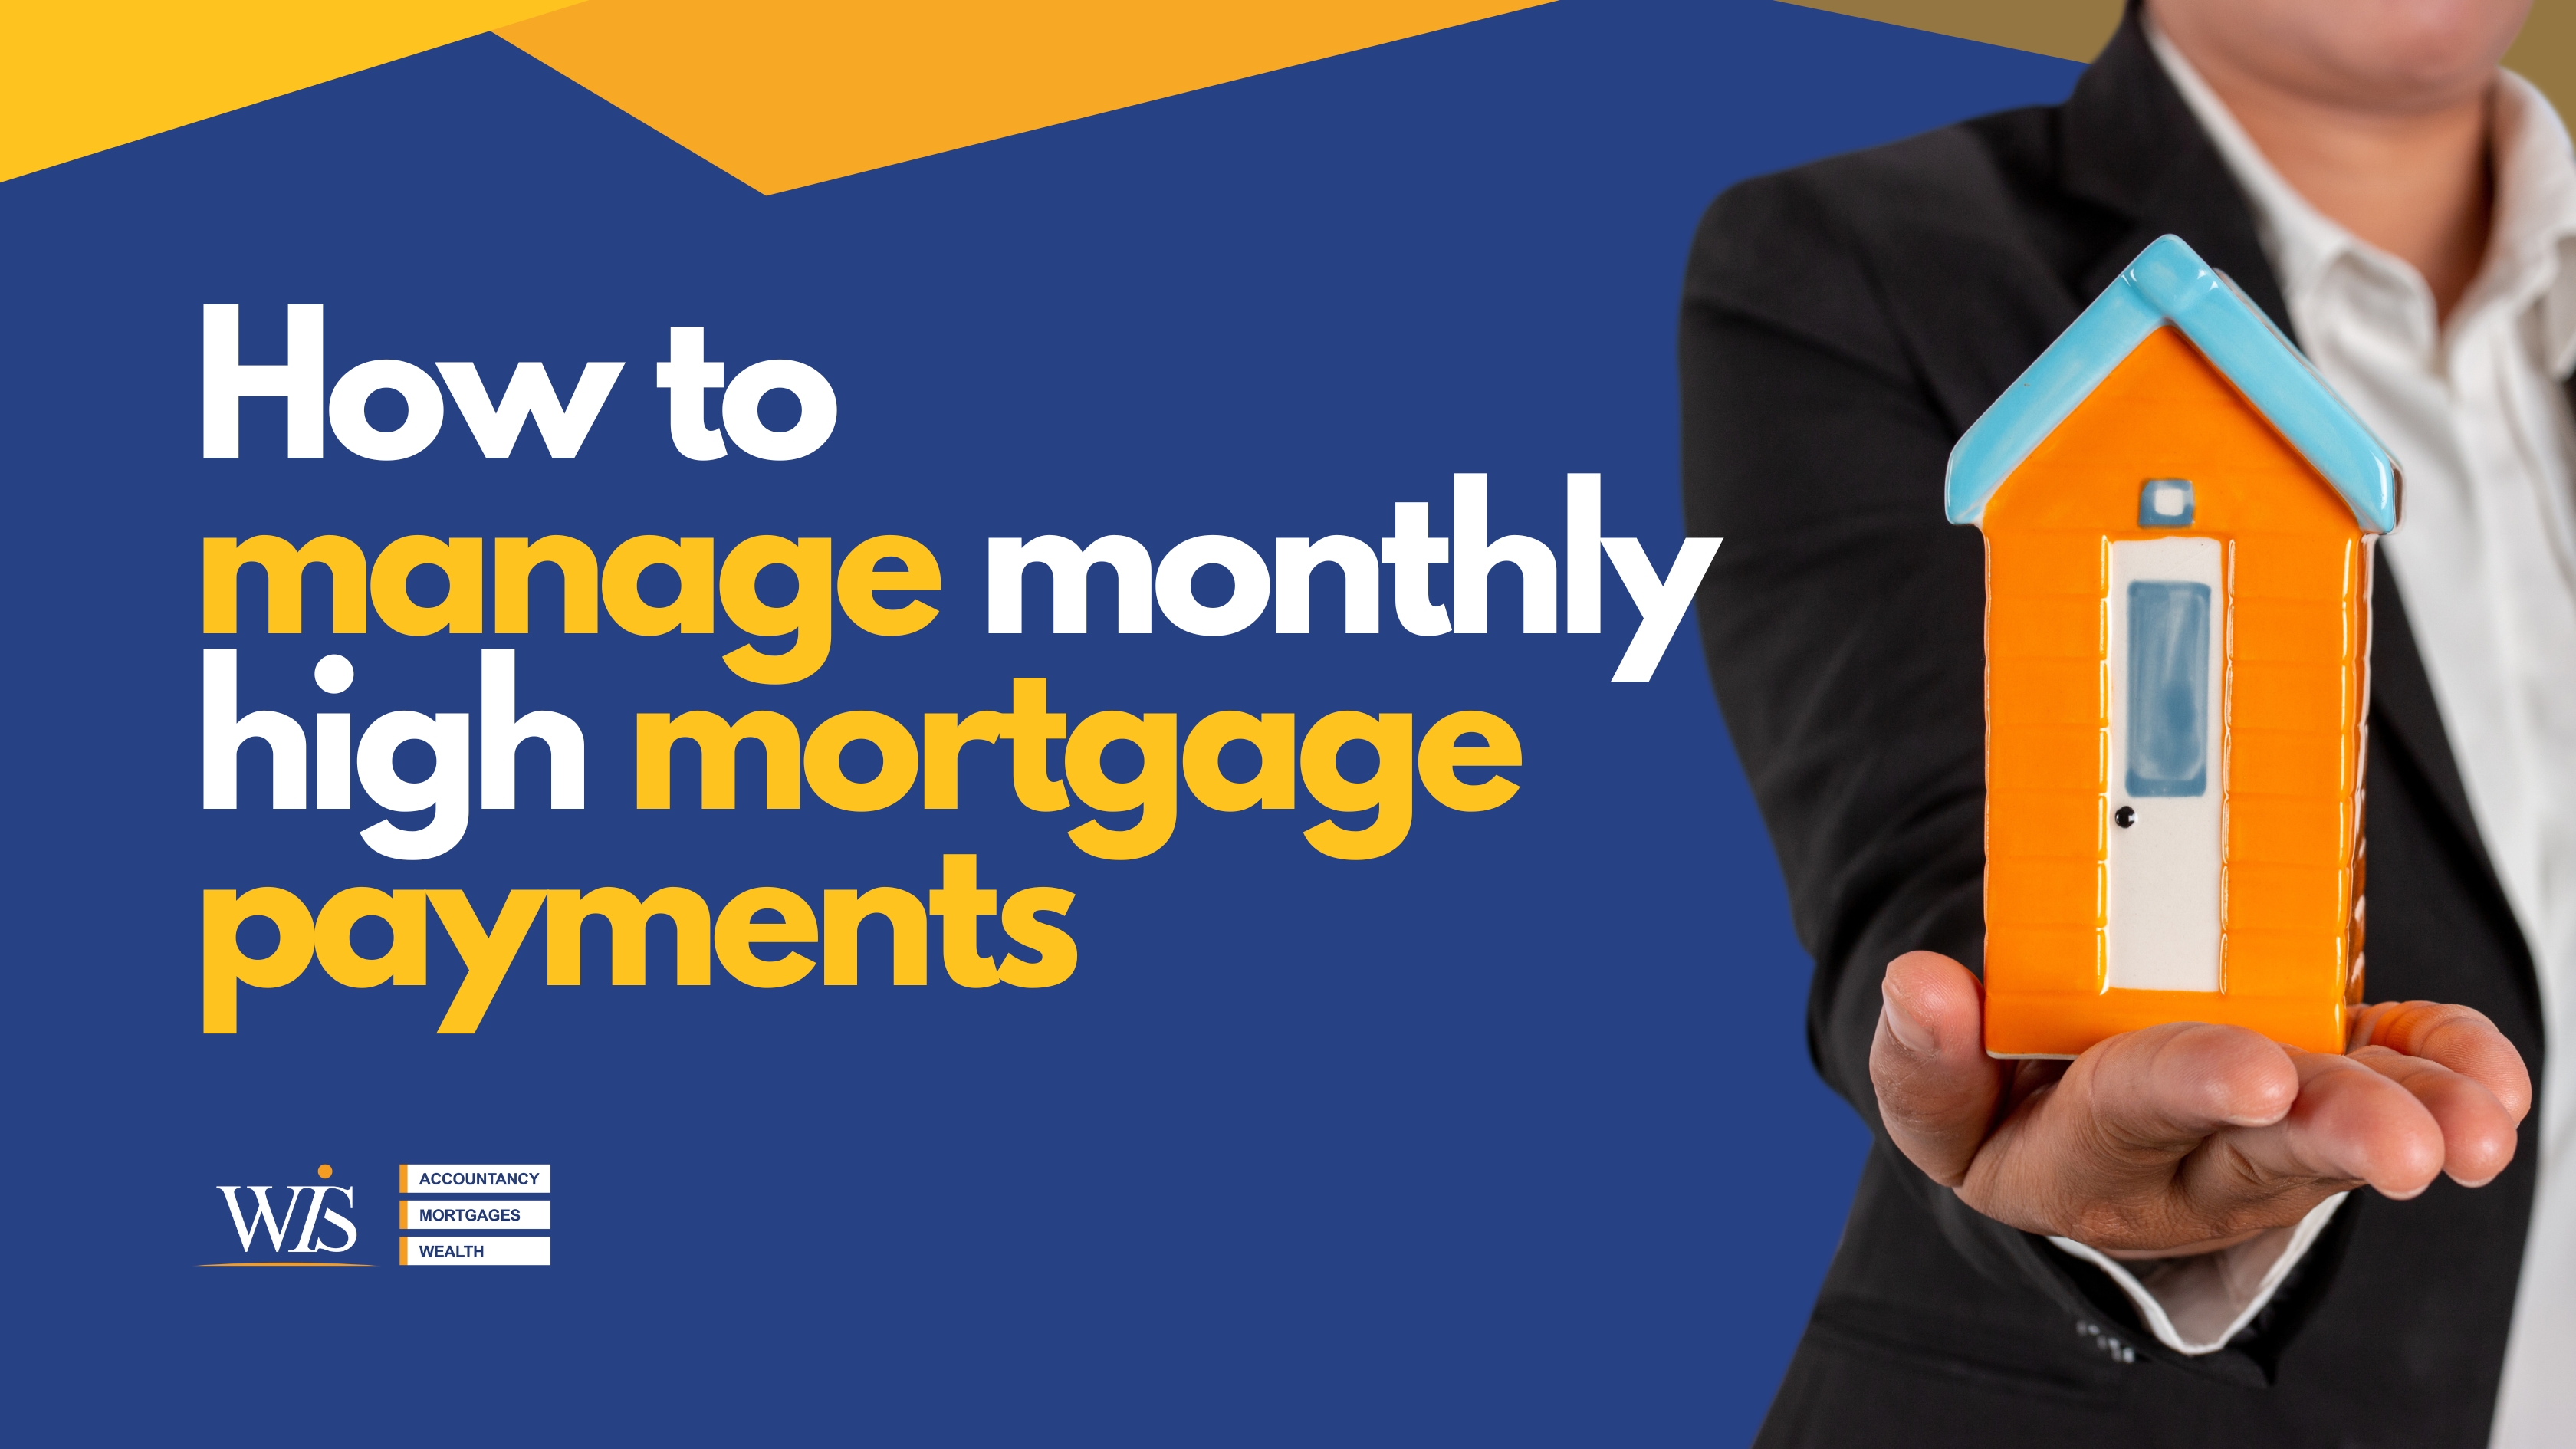 How to Manage High Monthly Mortgage Payments image